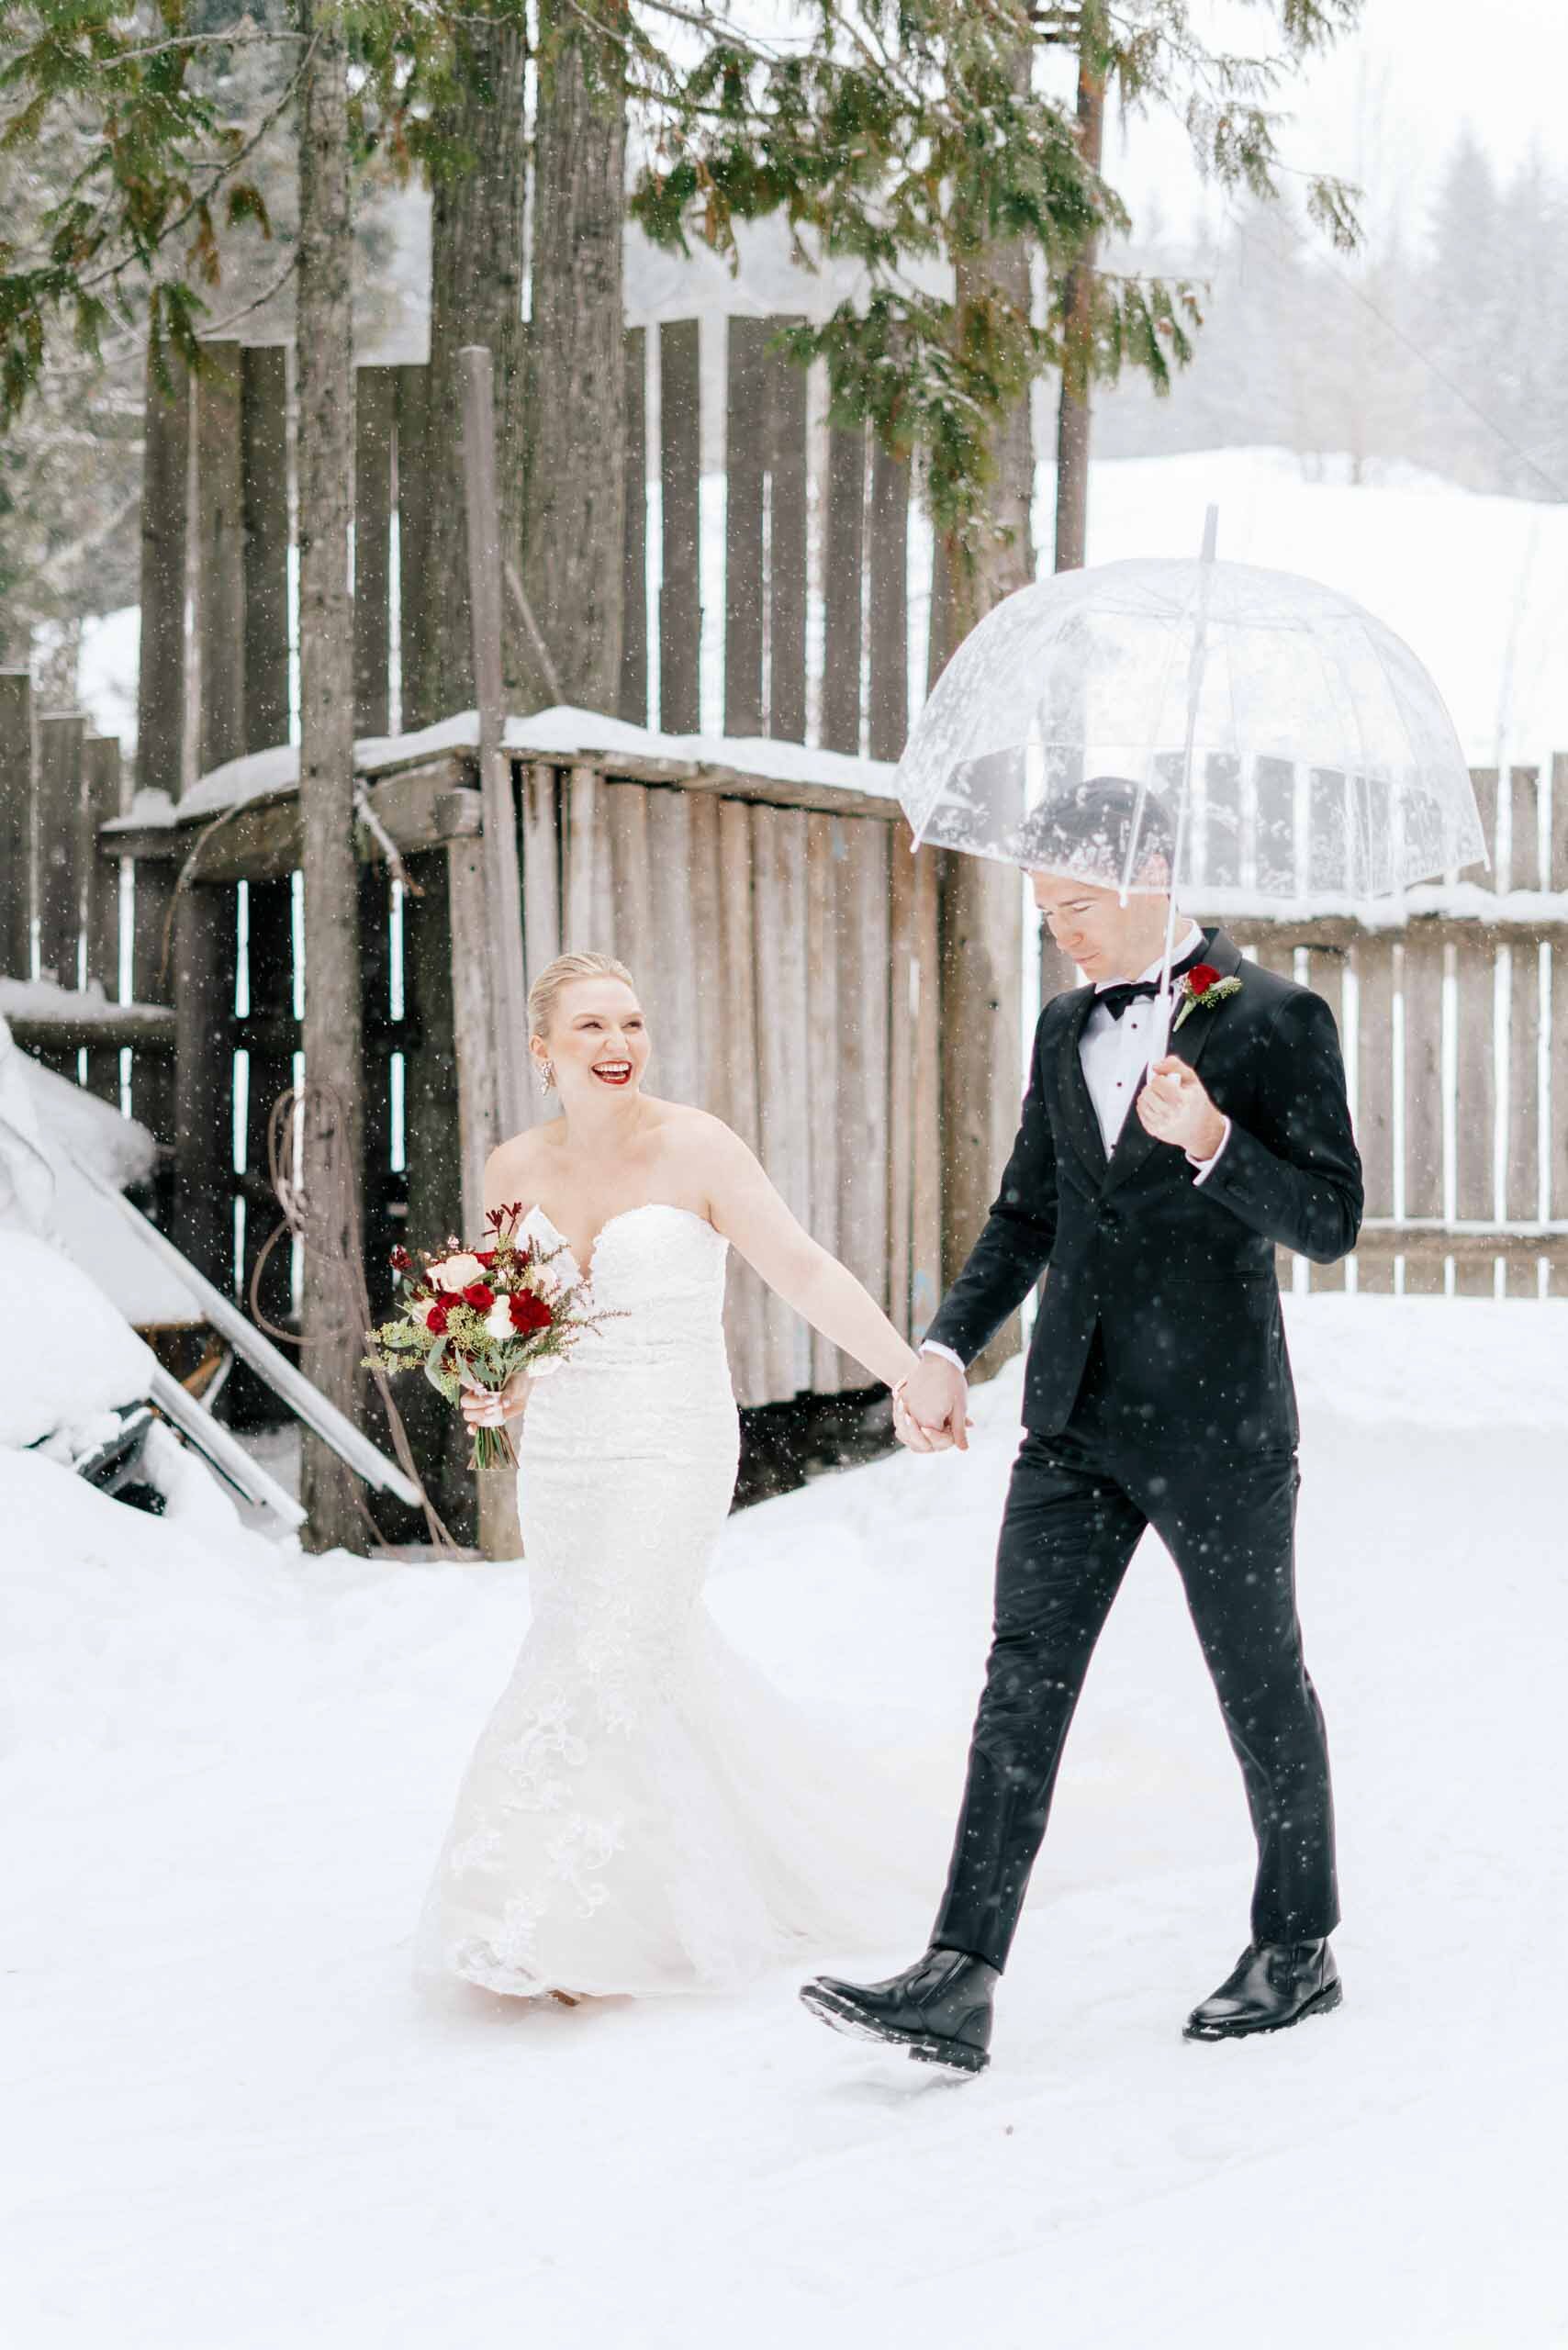 A bride and groom walk hand in hand, next to a wooden fence, through the snow in Whistler, BC.